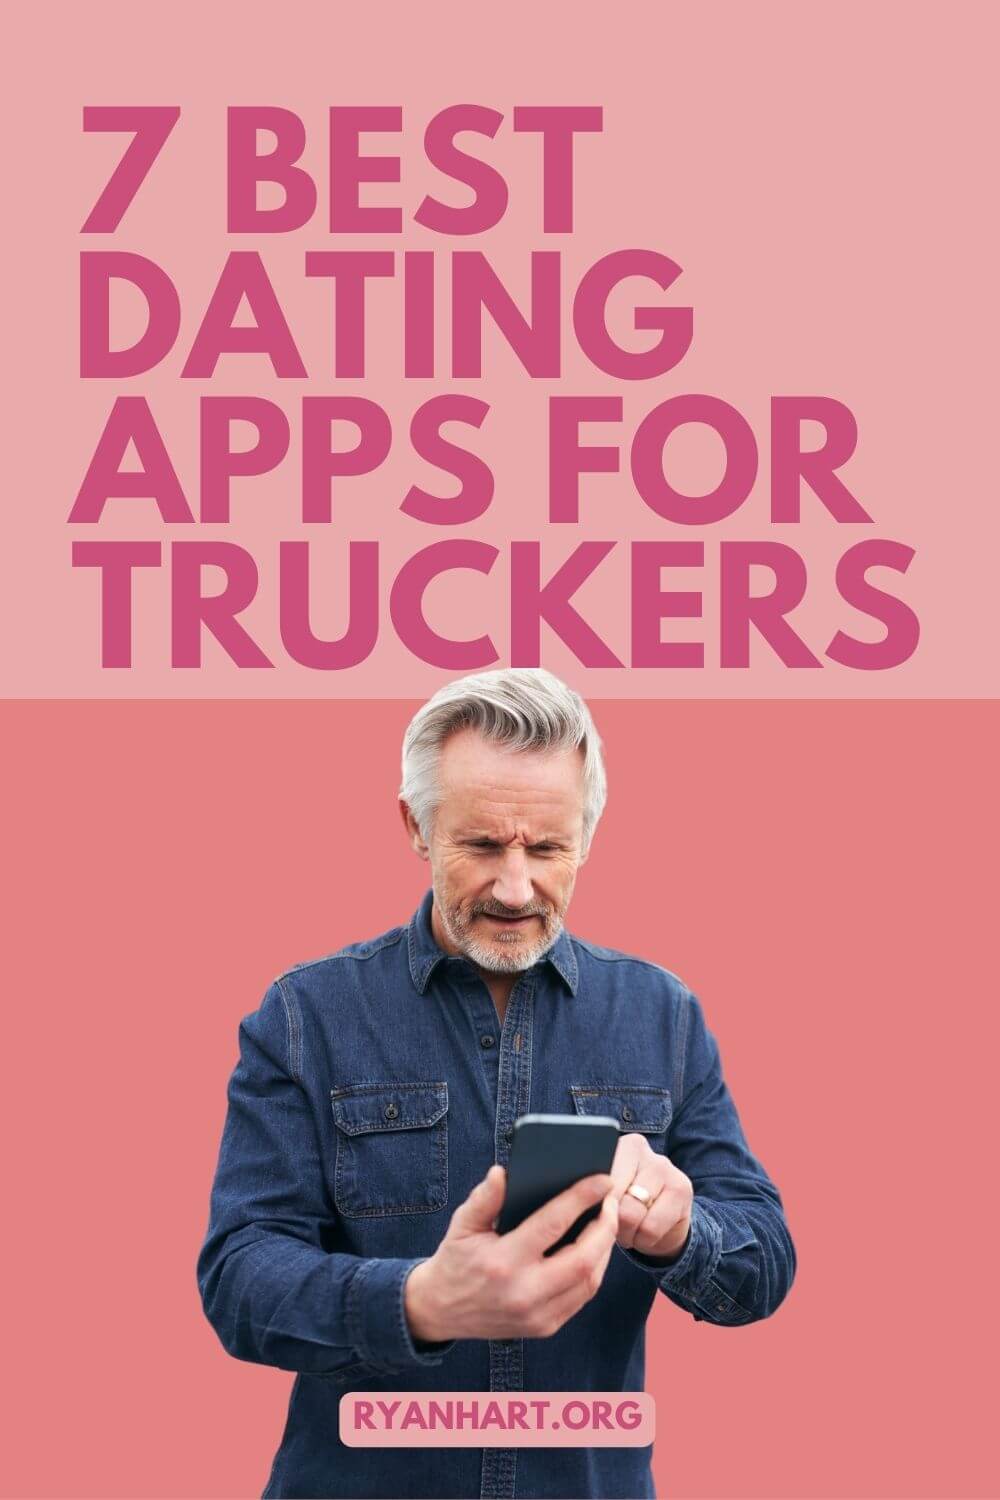 Truck driver using a dating app